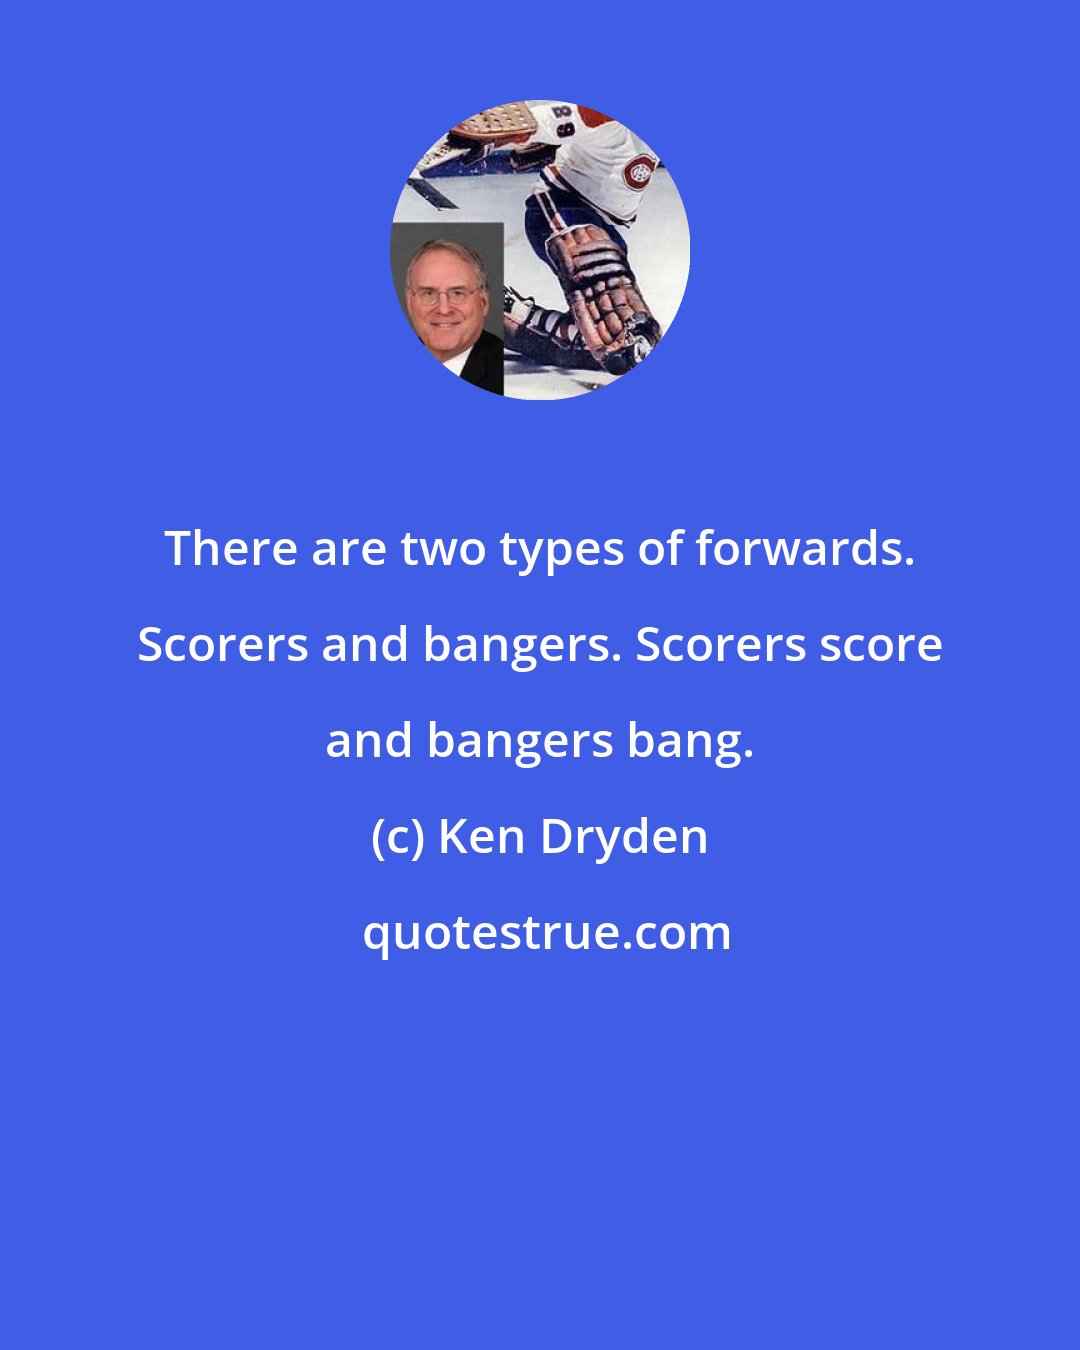 Ken Dryden: There are two types of forwards. Scorers and bangers. Scorers score and bangers bang.